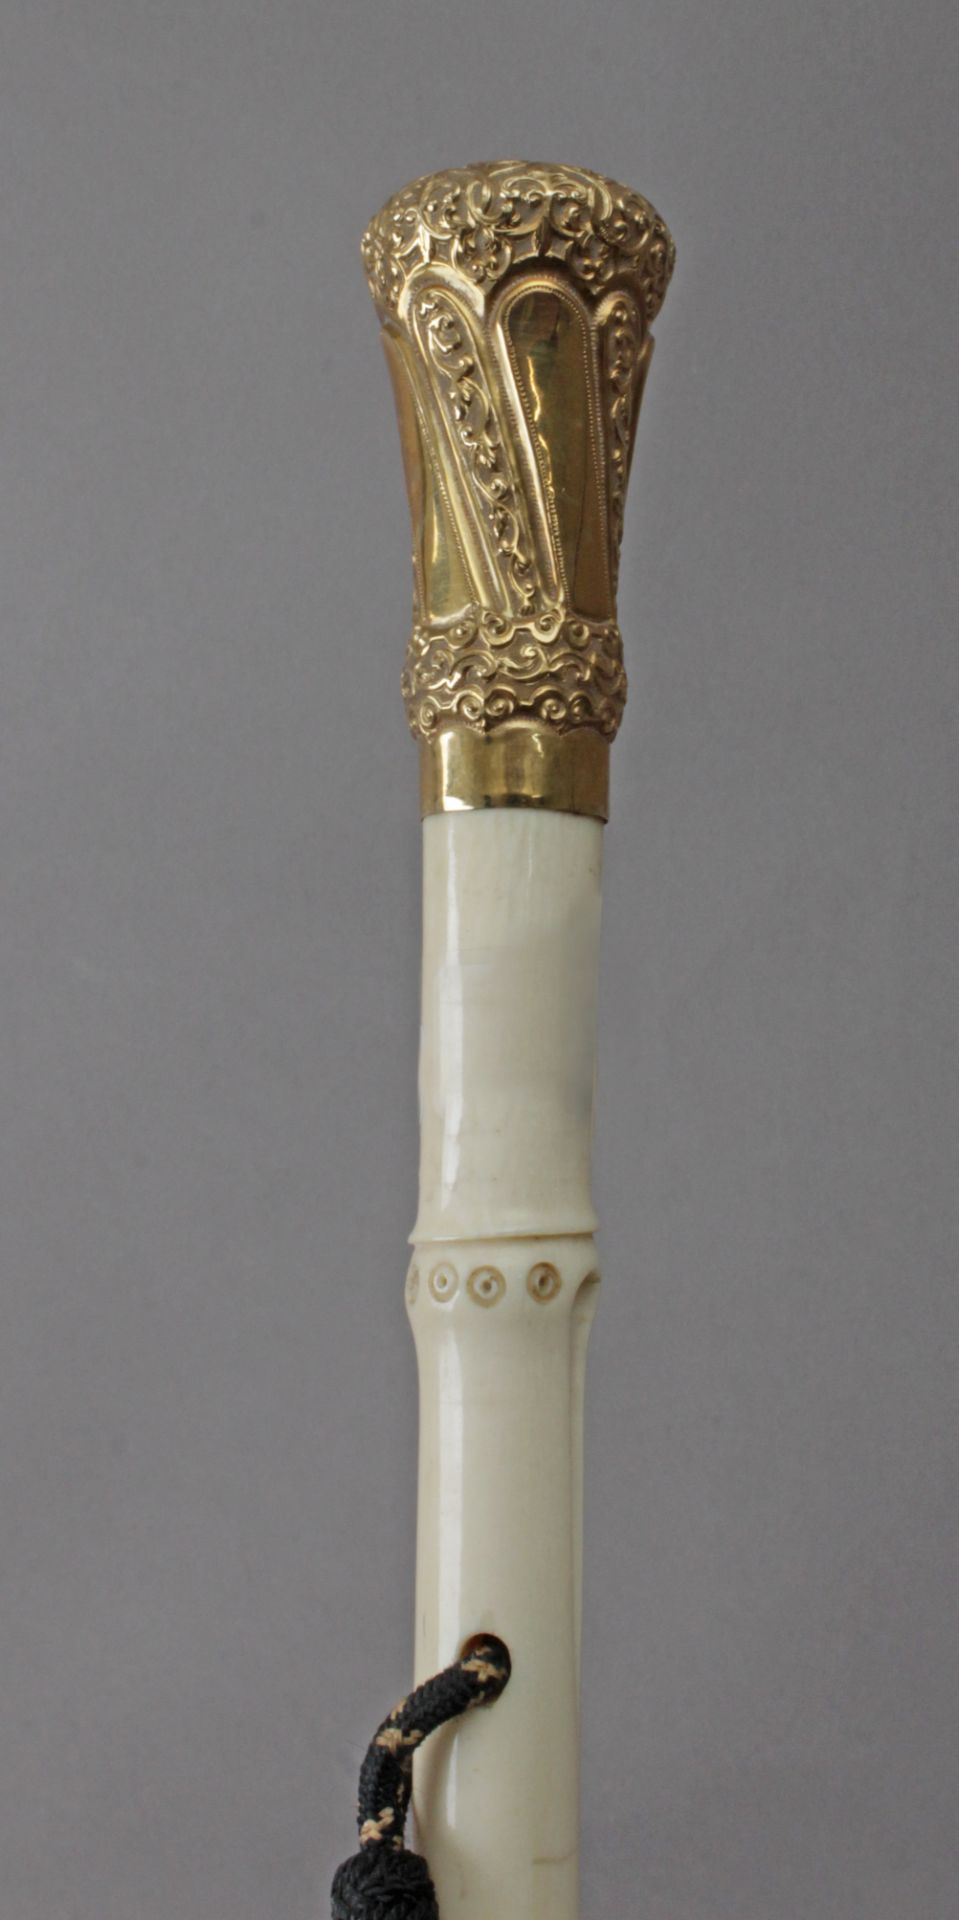 A first half of 20th century French baton in carved ivory and 18k. yellow gold - Image 2 of 3